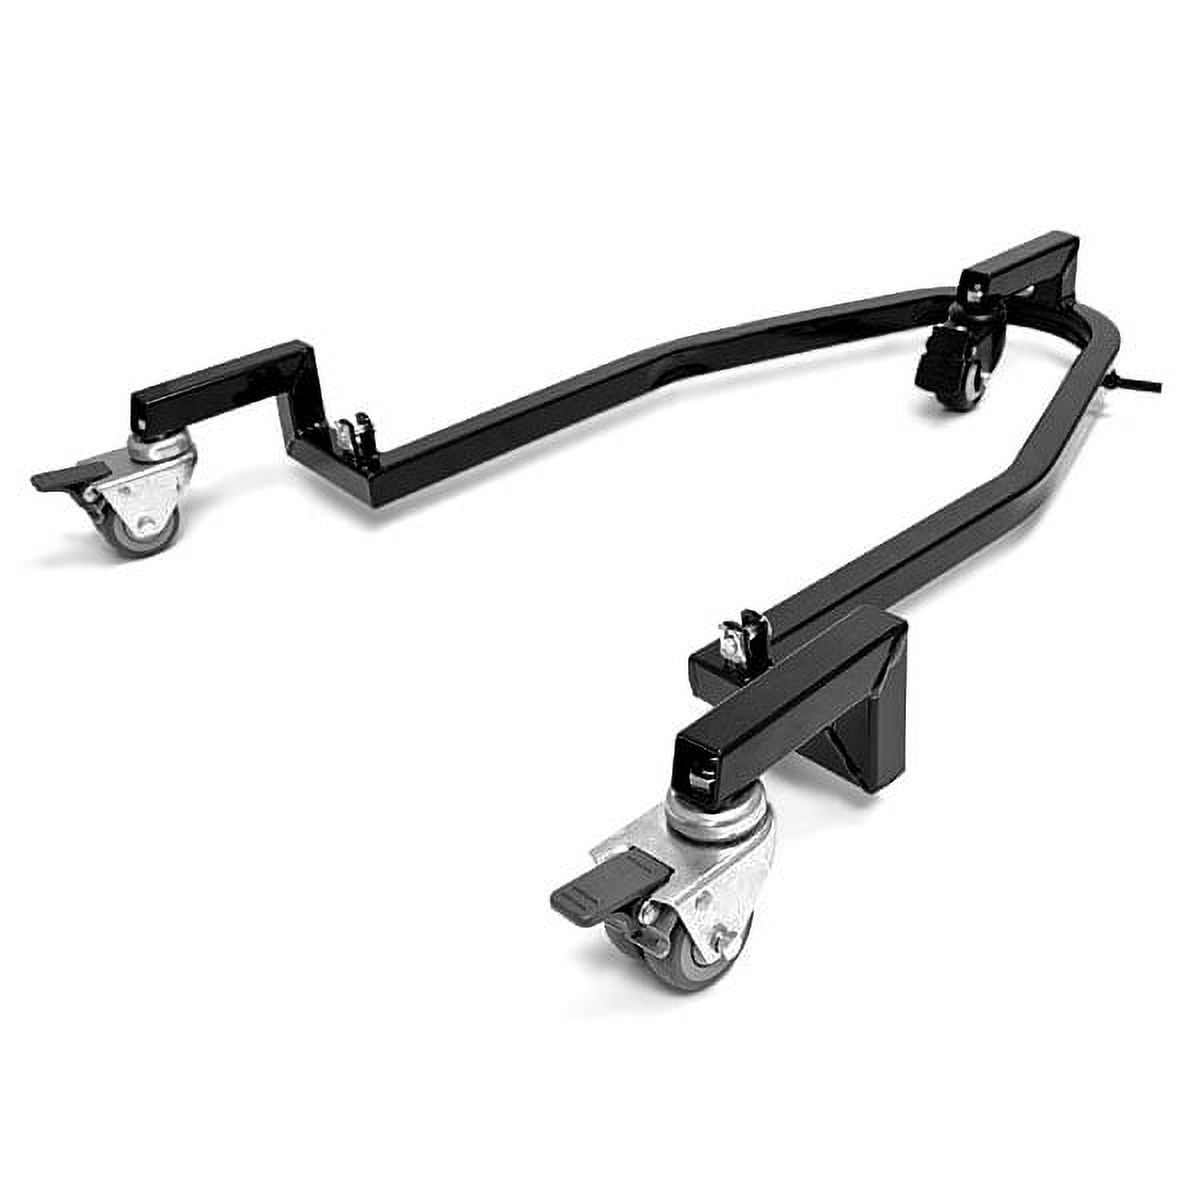 Venom Motorcycle Trolley Rear Lift Stand Attachment Compatible with Honda CMX 250 450 Rebel Fury - image 1 of 4